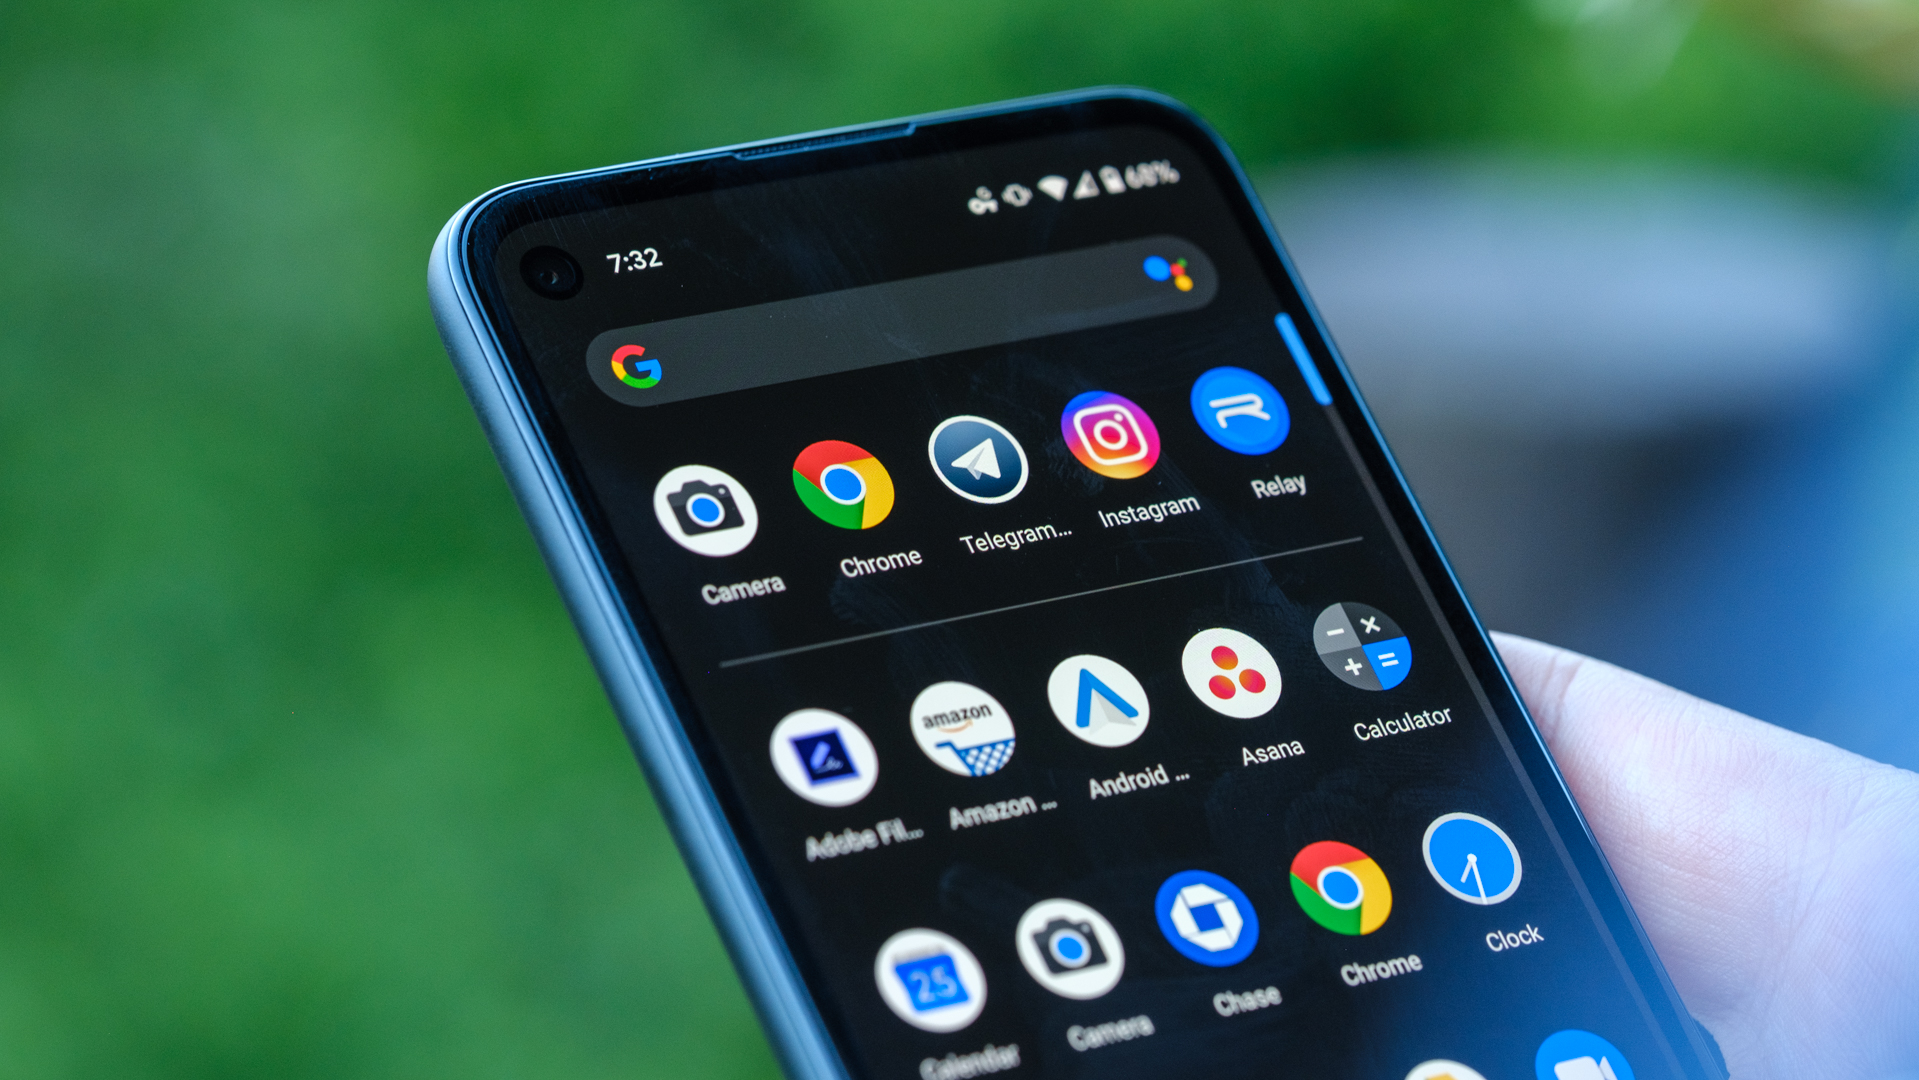 Google Pixel 4a upper half of display with apps